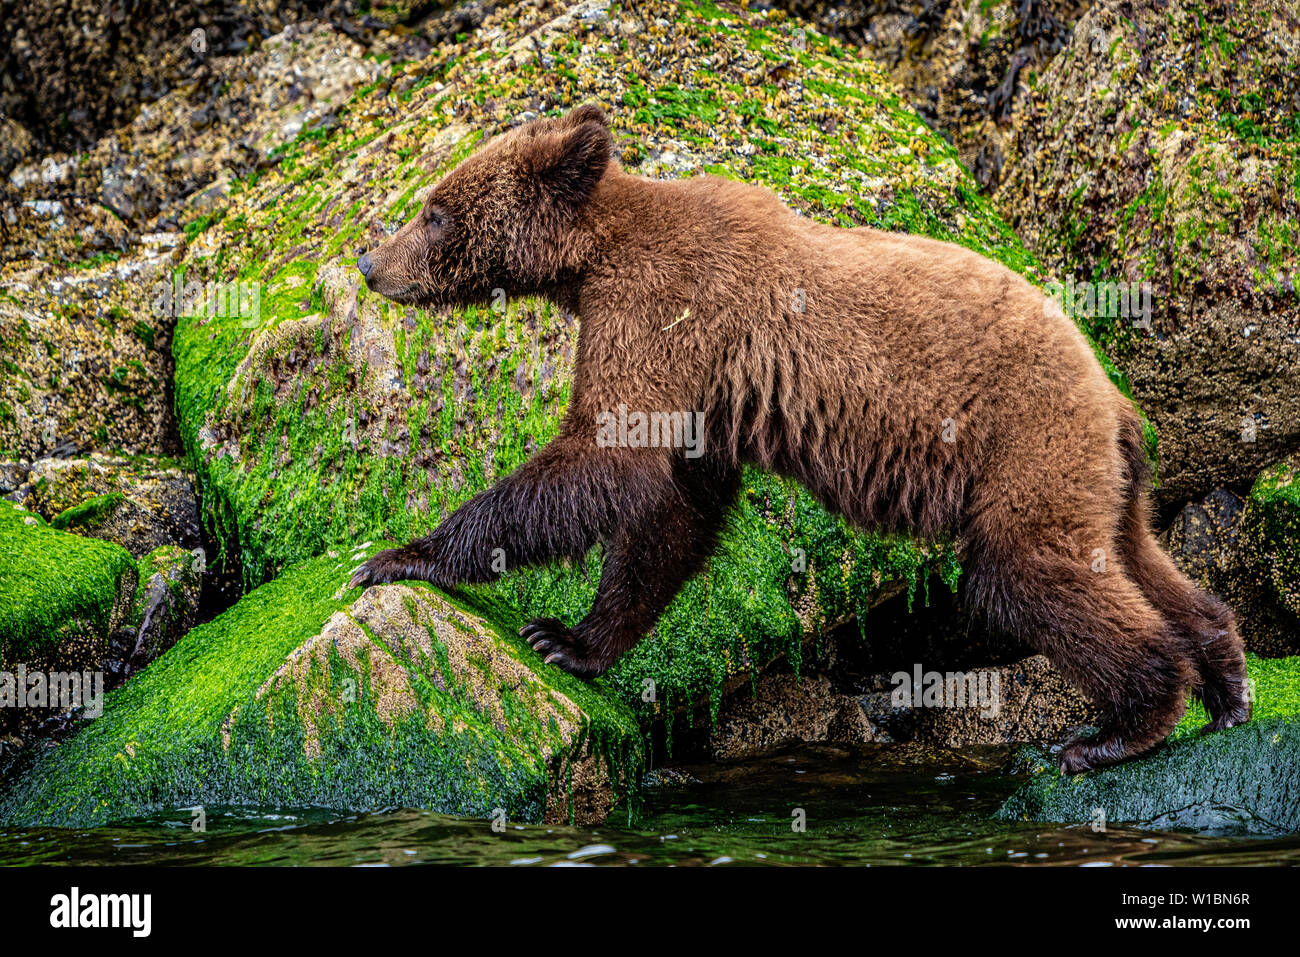 Grizzly bear cub jumping along the low tideline in Knight Inlet, First Nations Territory, British Columbia, Canada. Stock Photo